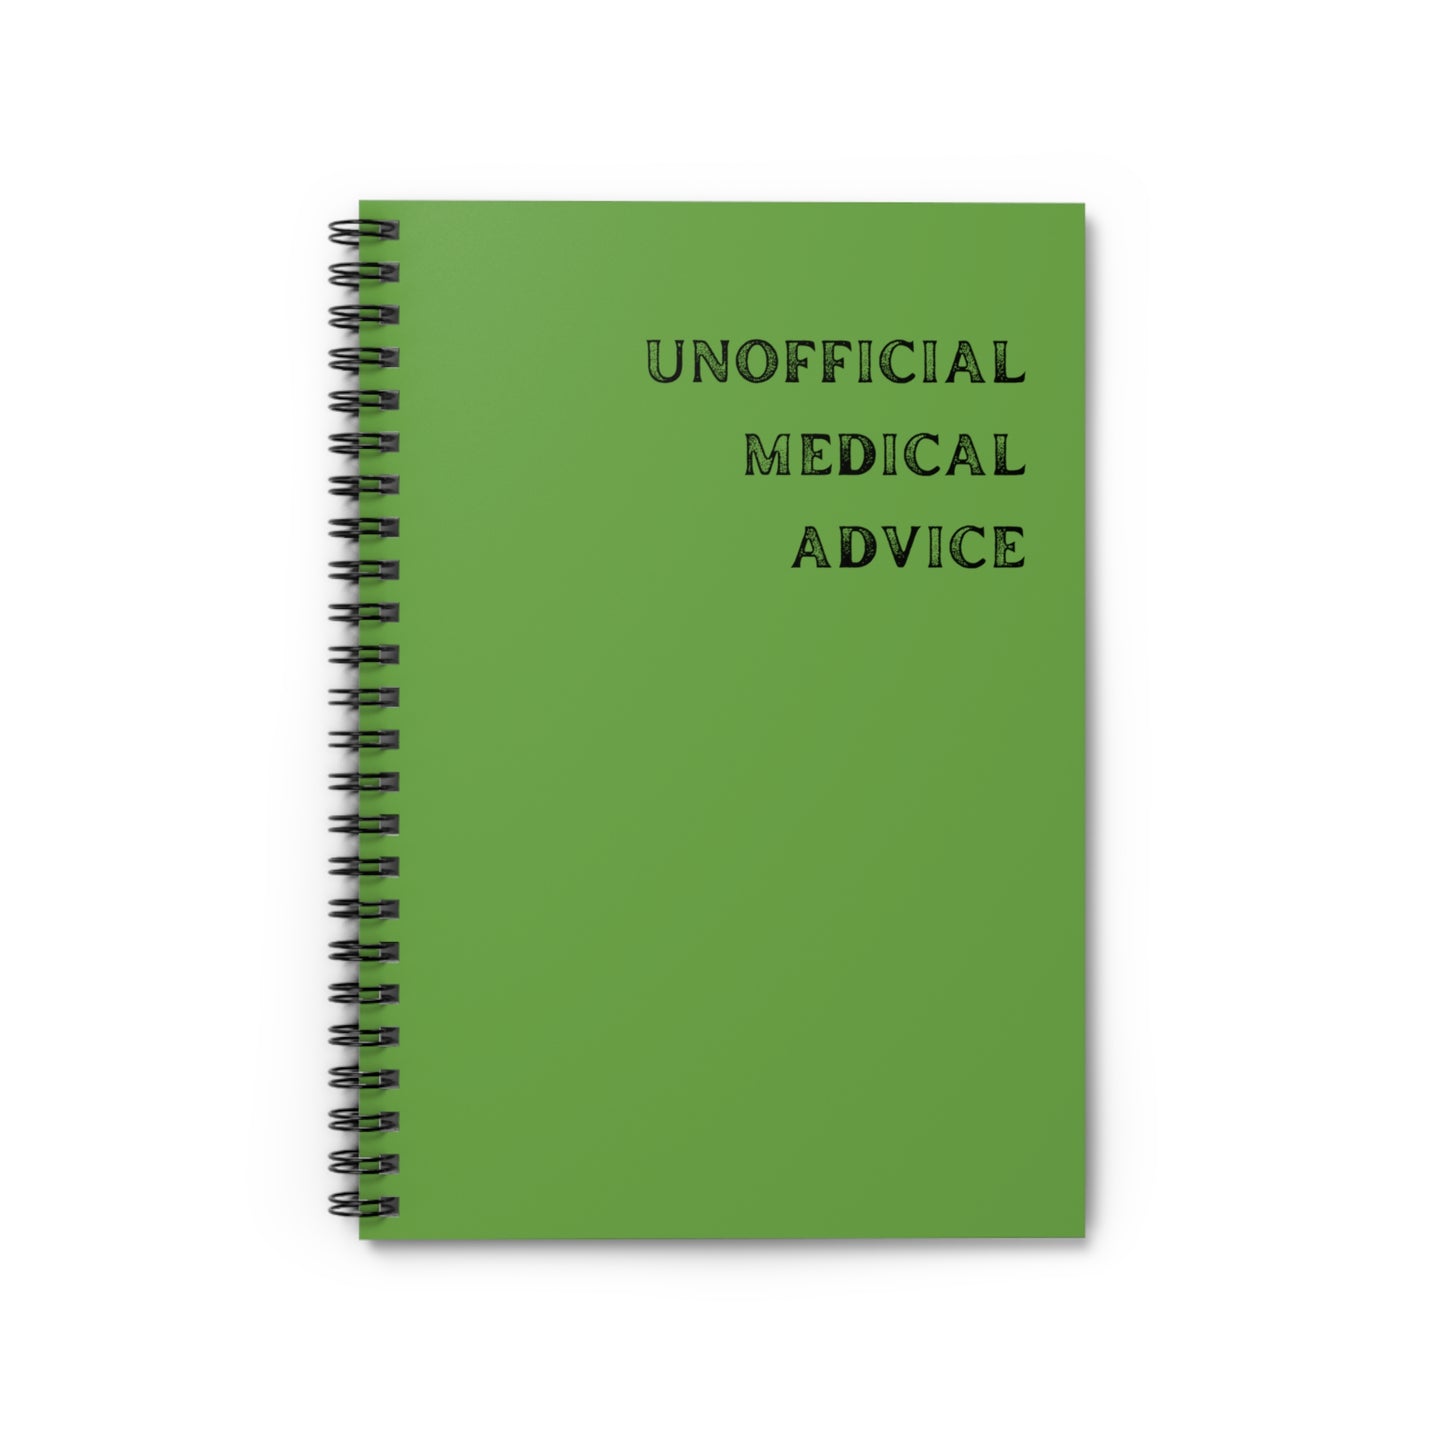 Unofficial Medical Advice, Notebook,  Funny Gift, Female Or Male Birthday And Christmas Gift, healthcare worker gift